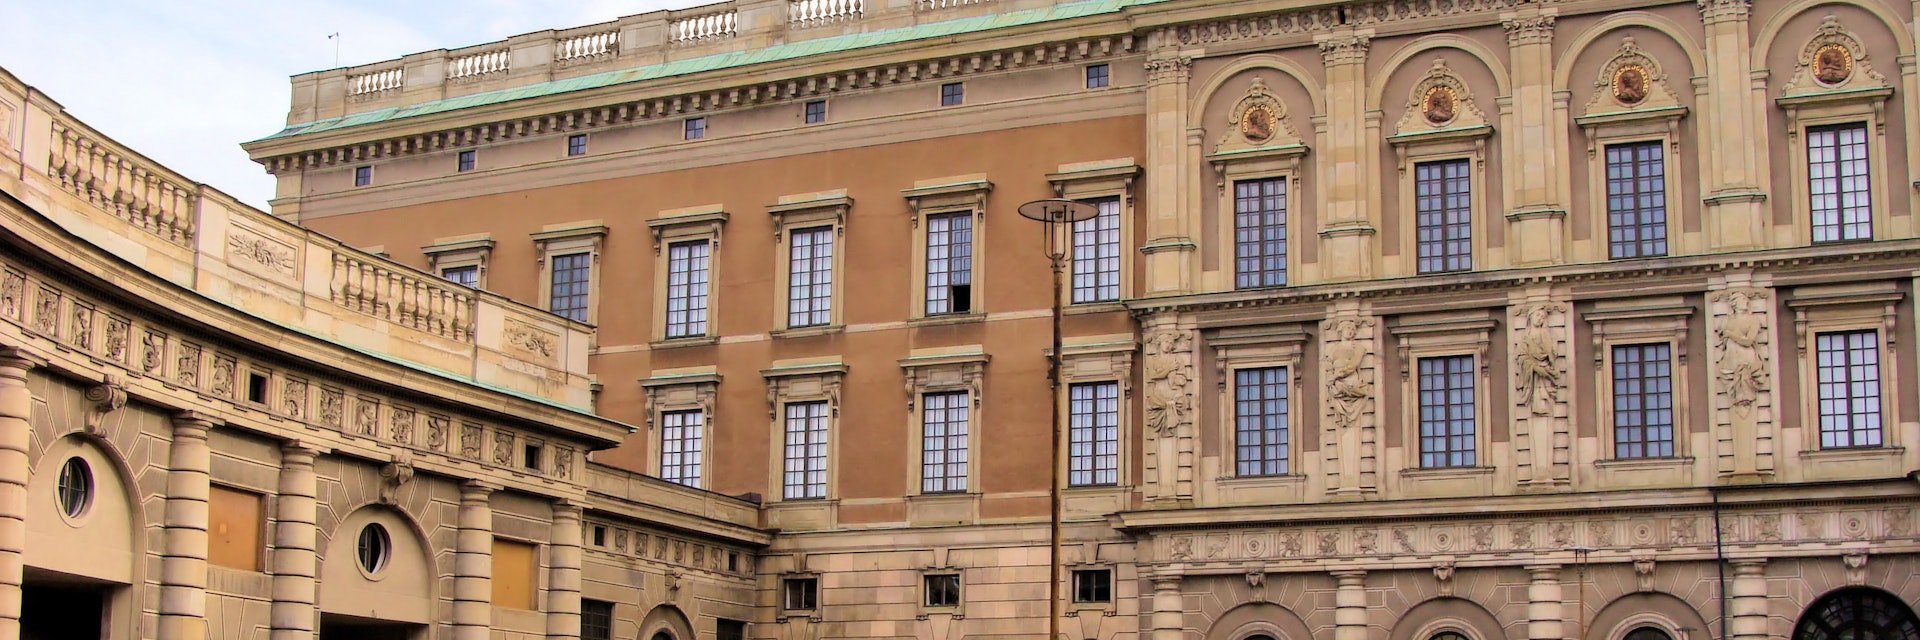 Outer courtyard at Stockholm's Royal Palace